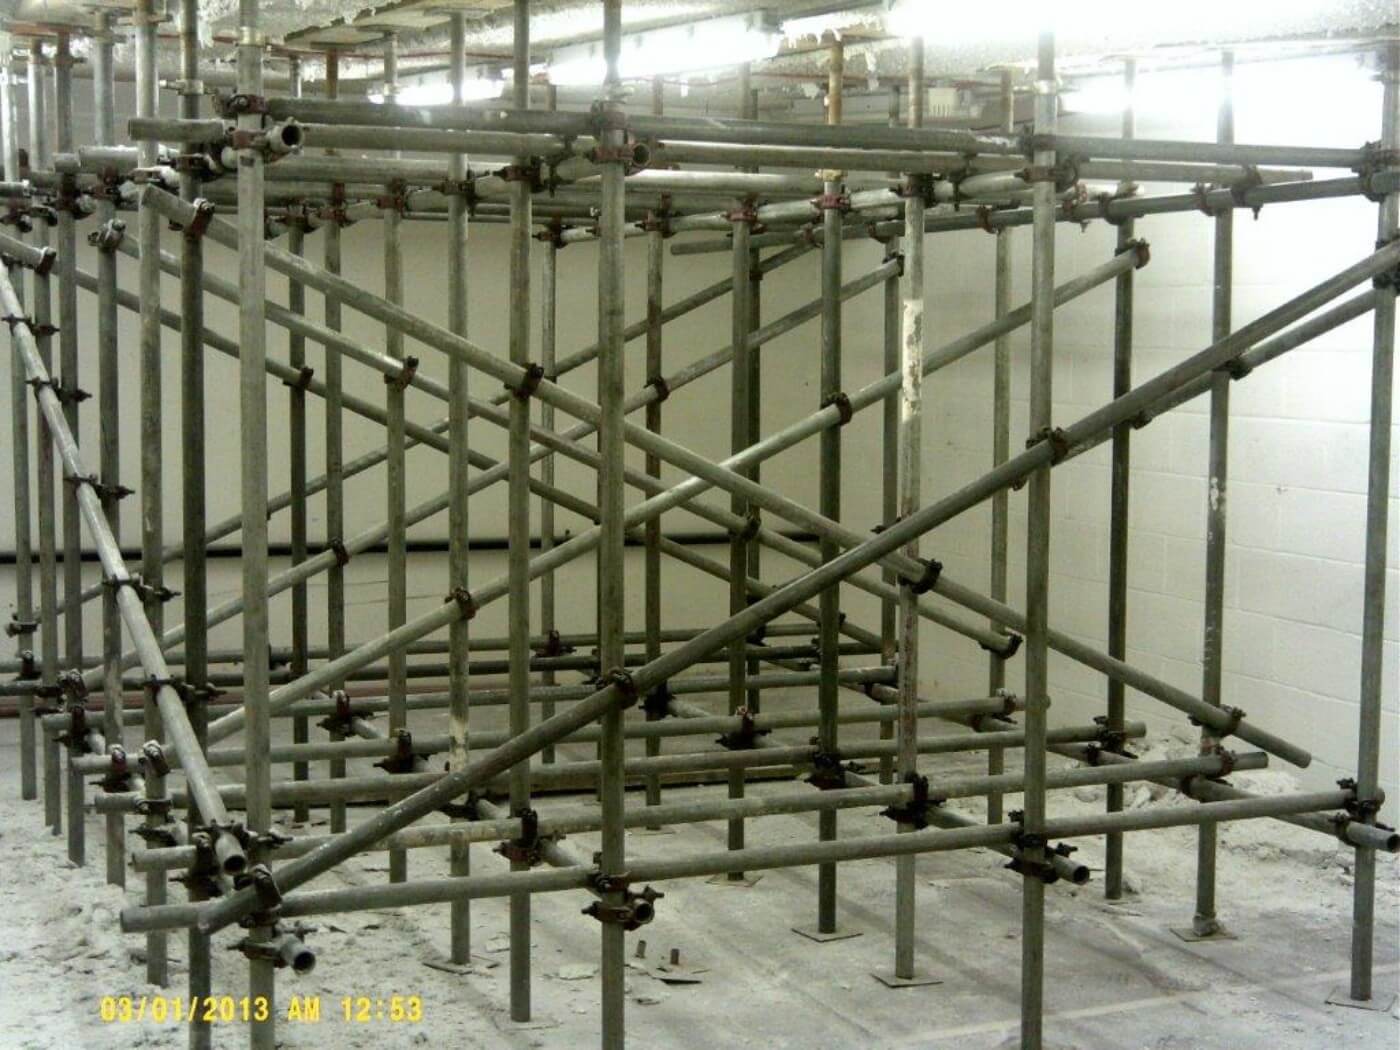 scaffolding supports a ceiling inside an industrial area